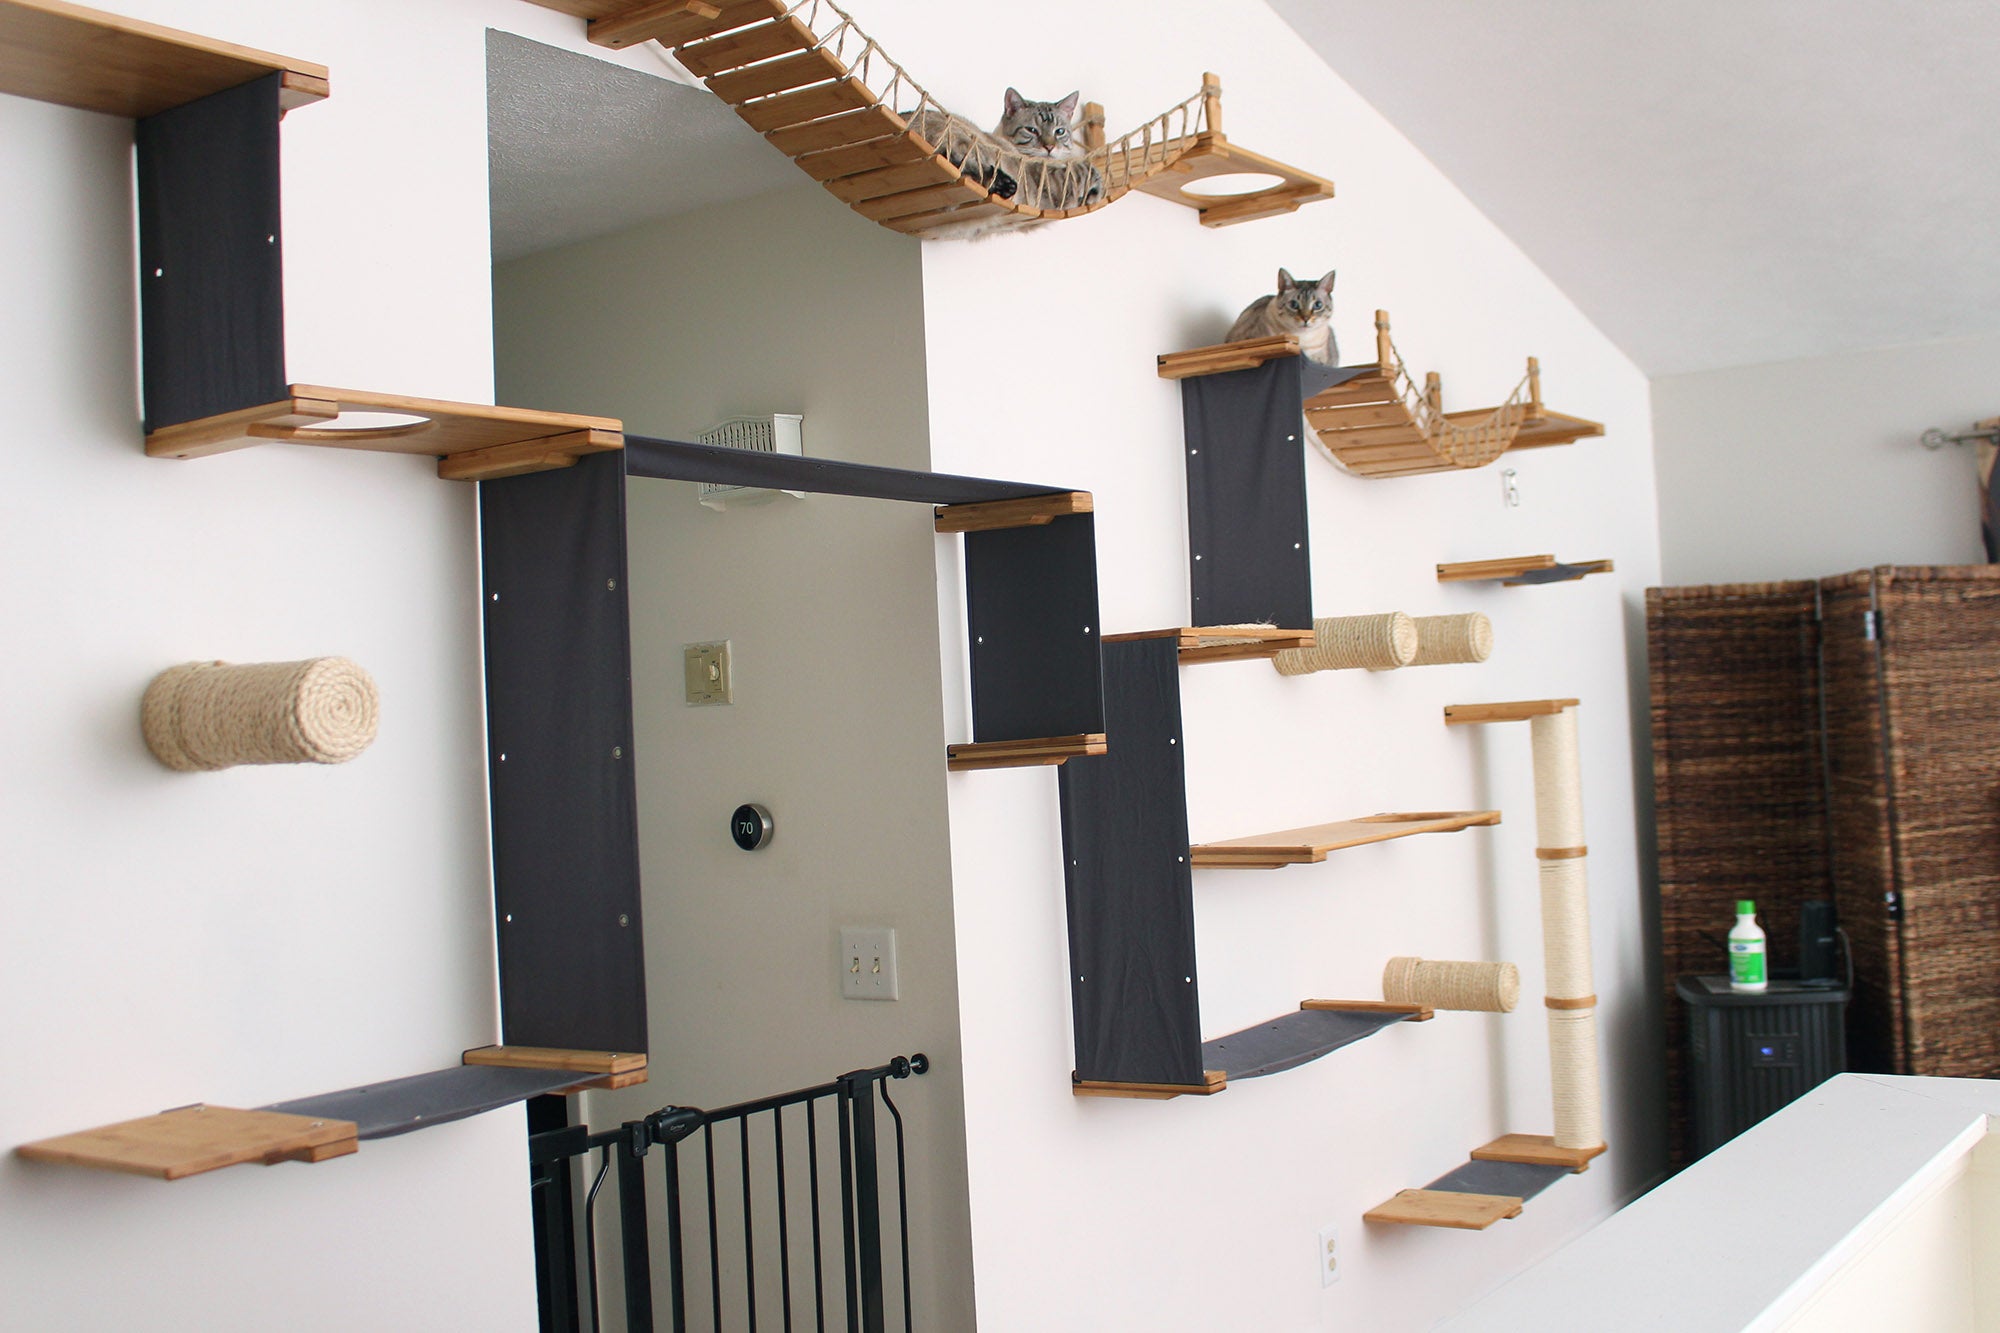 Designing Your Cat Wall Catastrophic, Making Cat Shelves